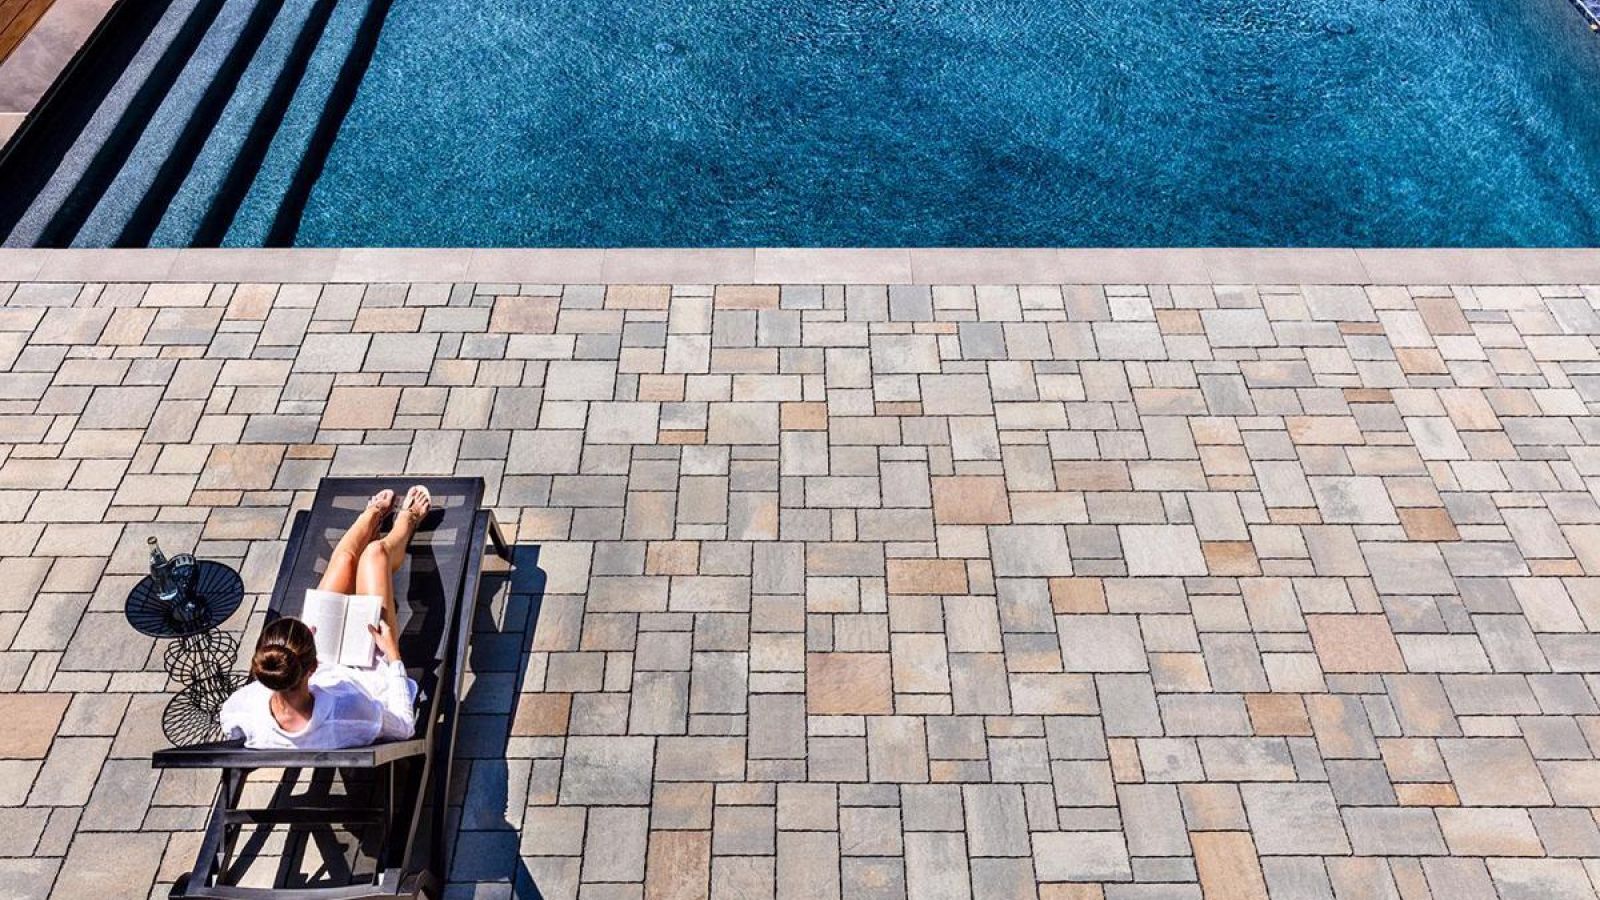 Durable Mista pavers in natural stone textures